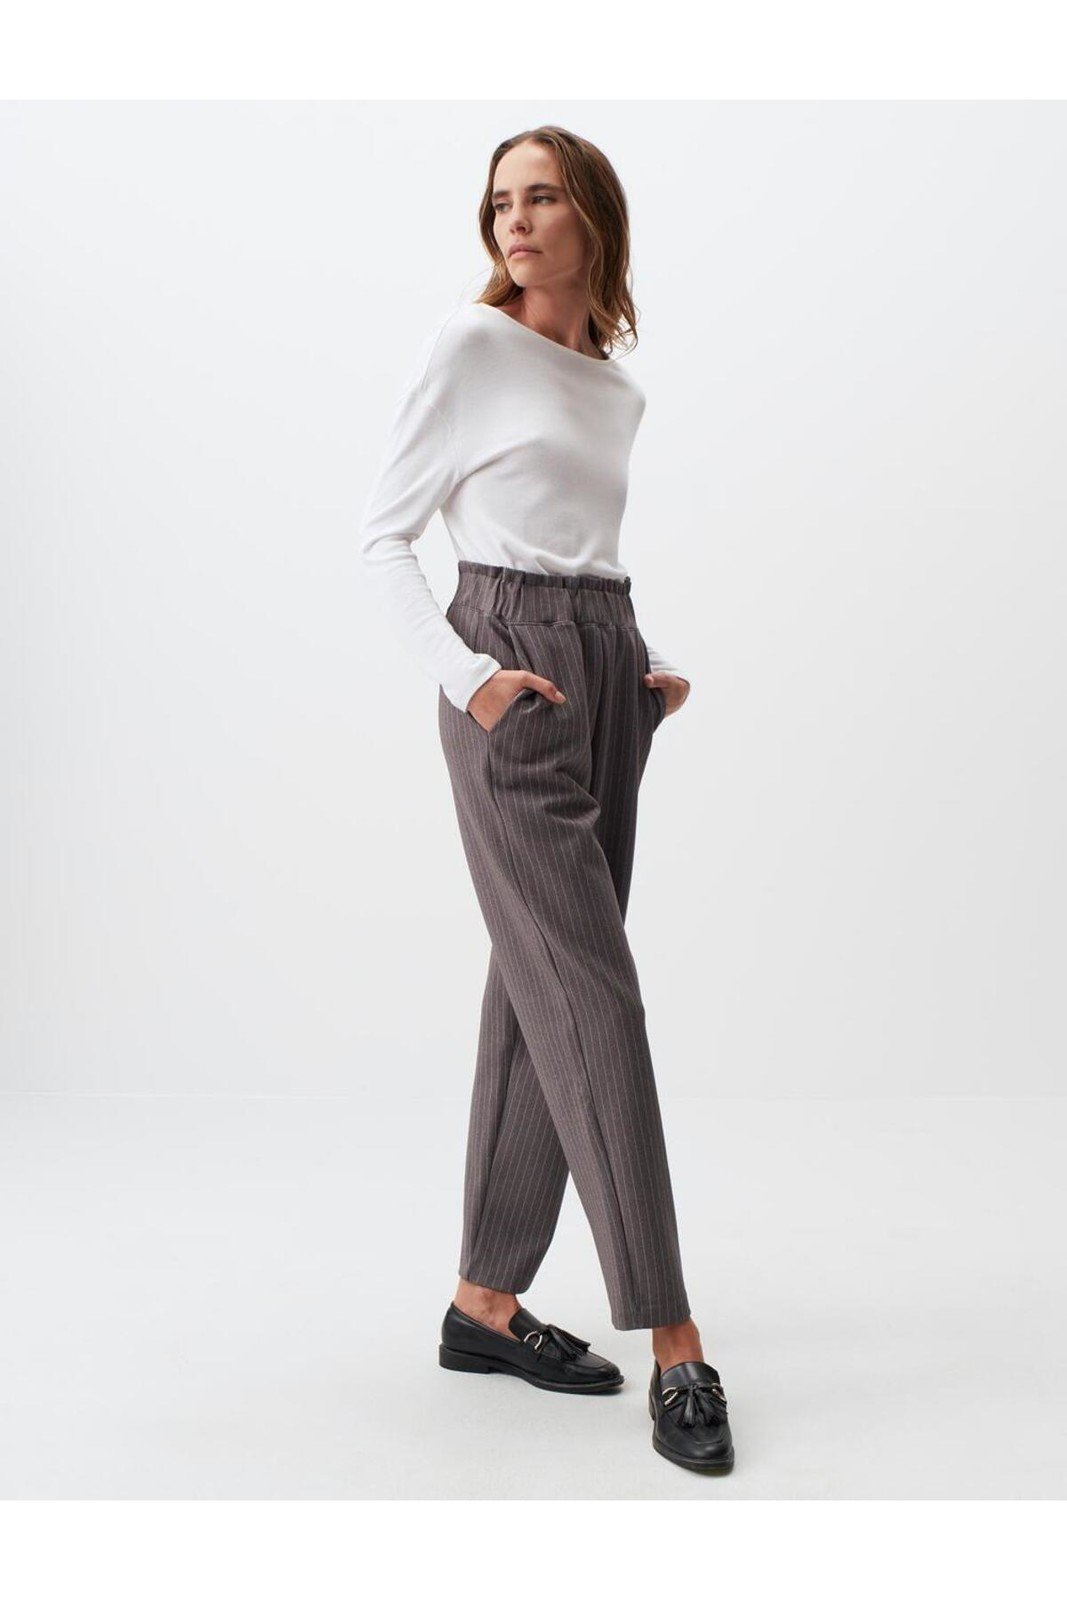 Jimmy Key Anthracite High Waist Line Patterned Fabric Trousers